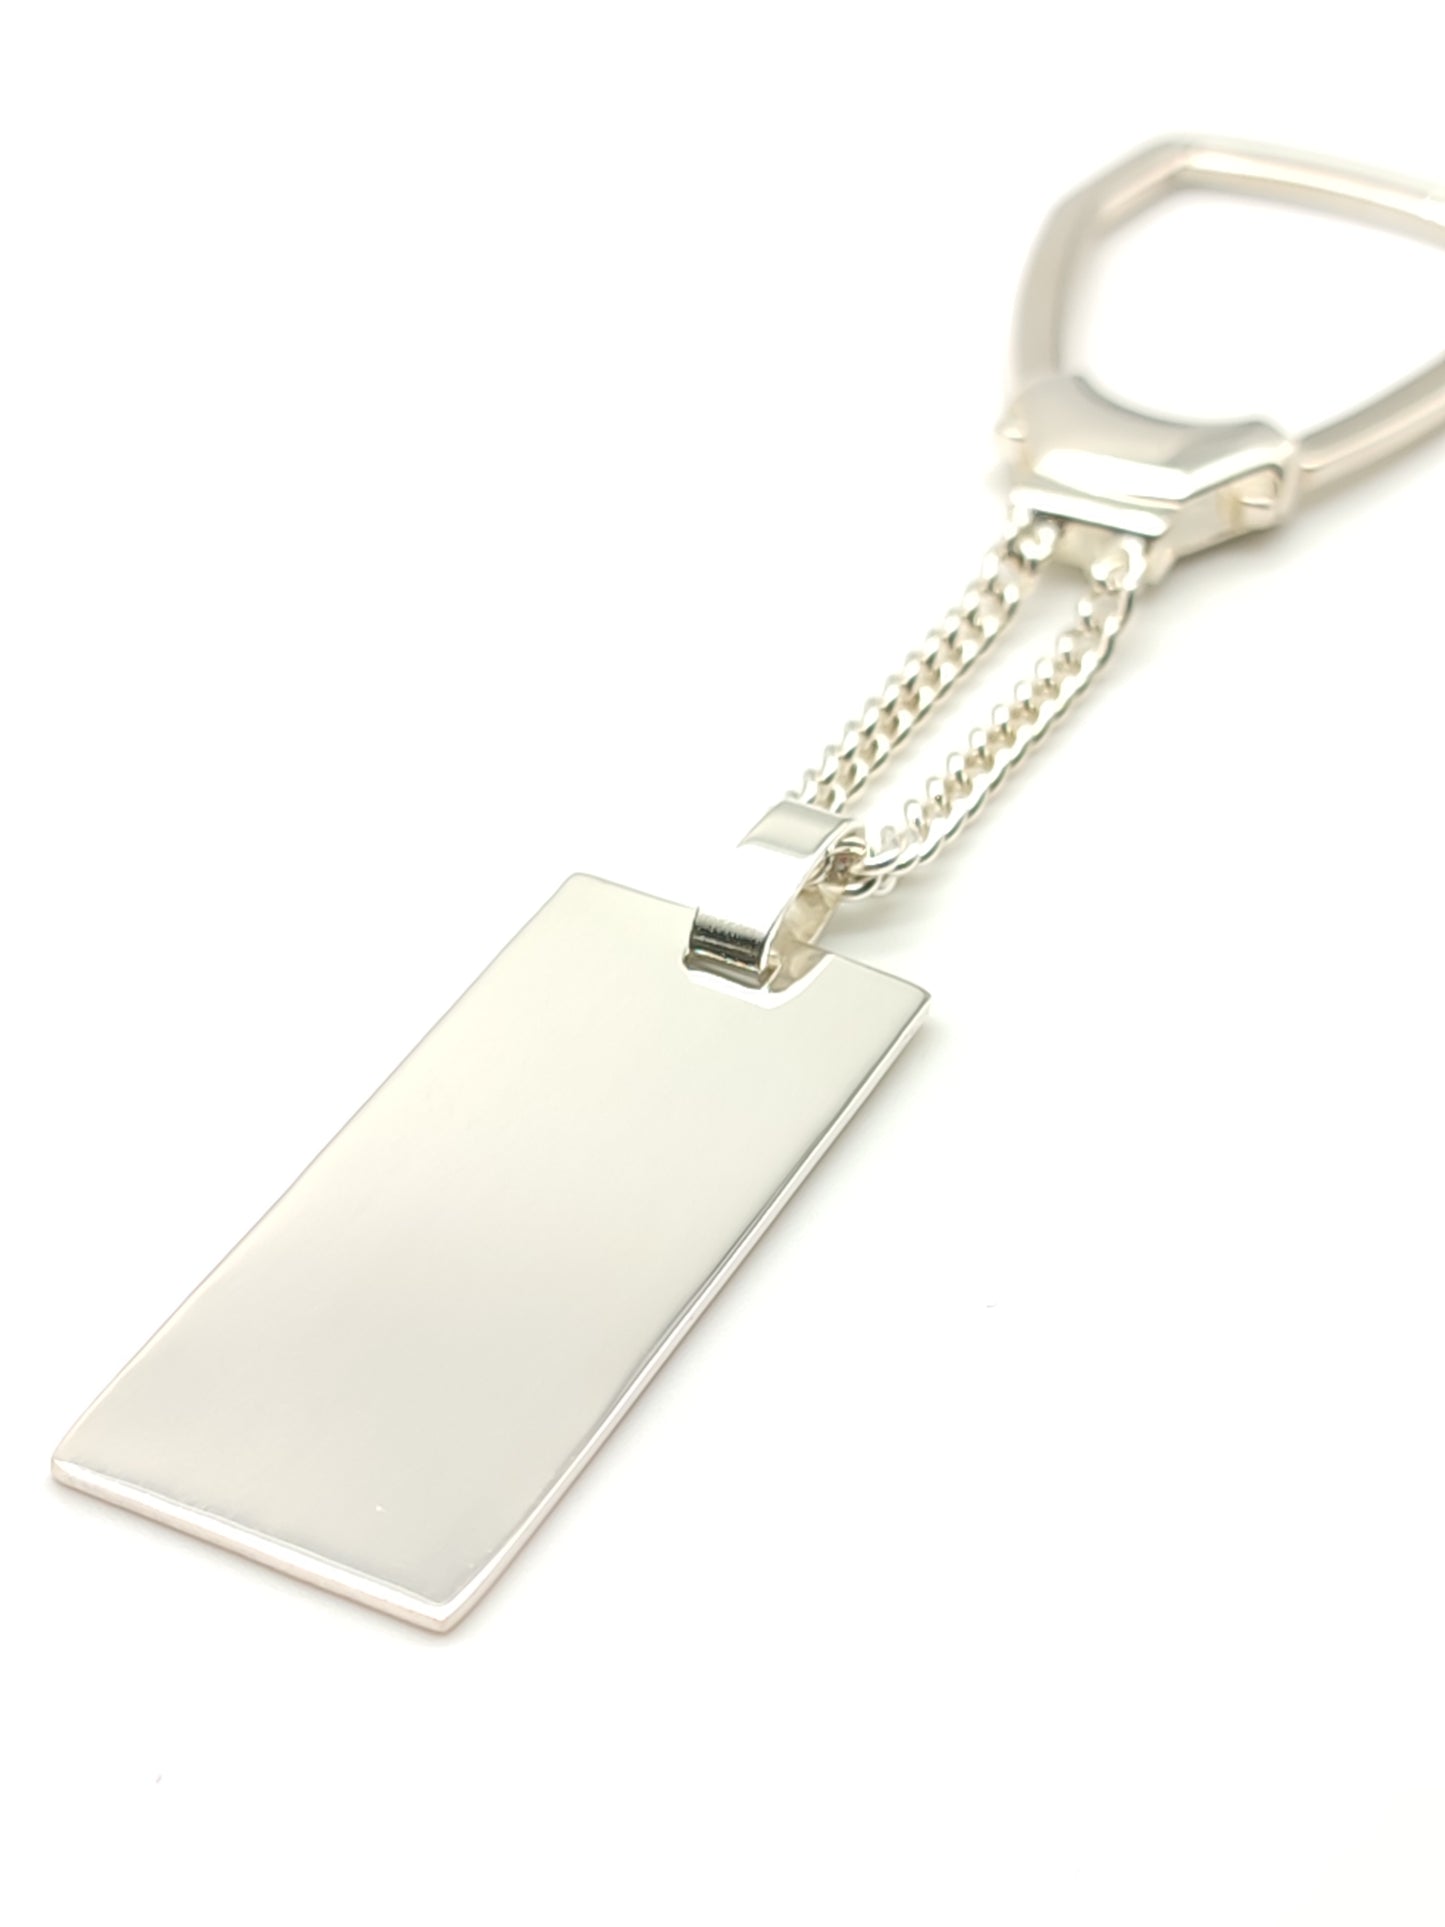 Silver key ring with plate